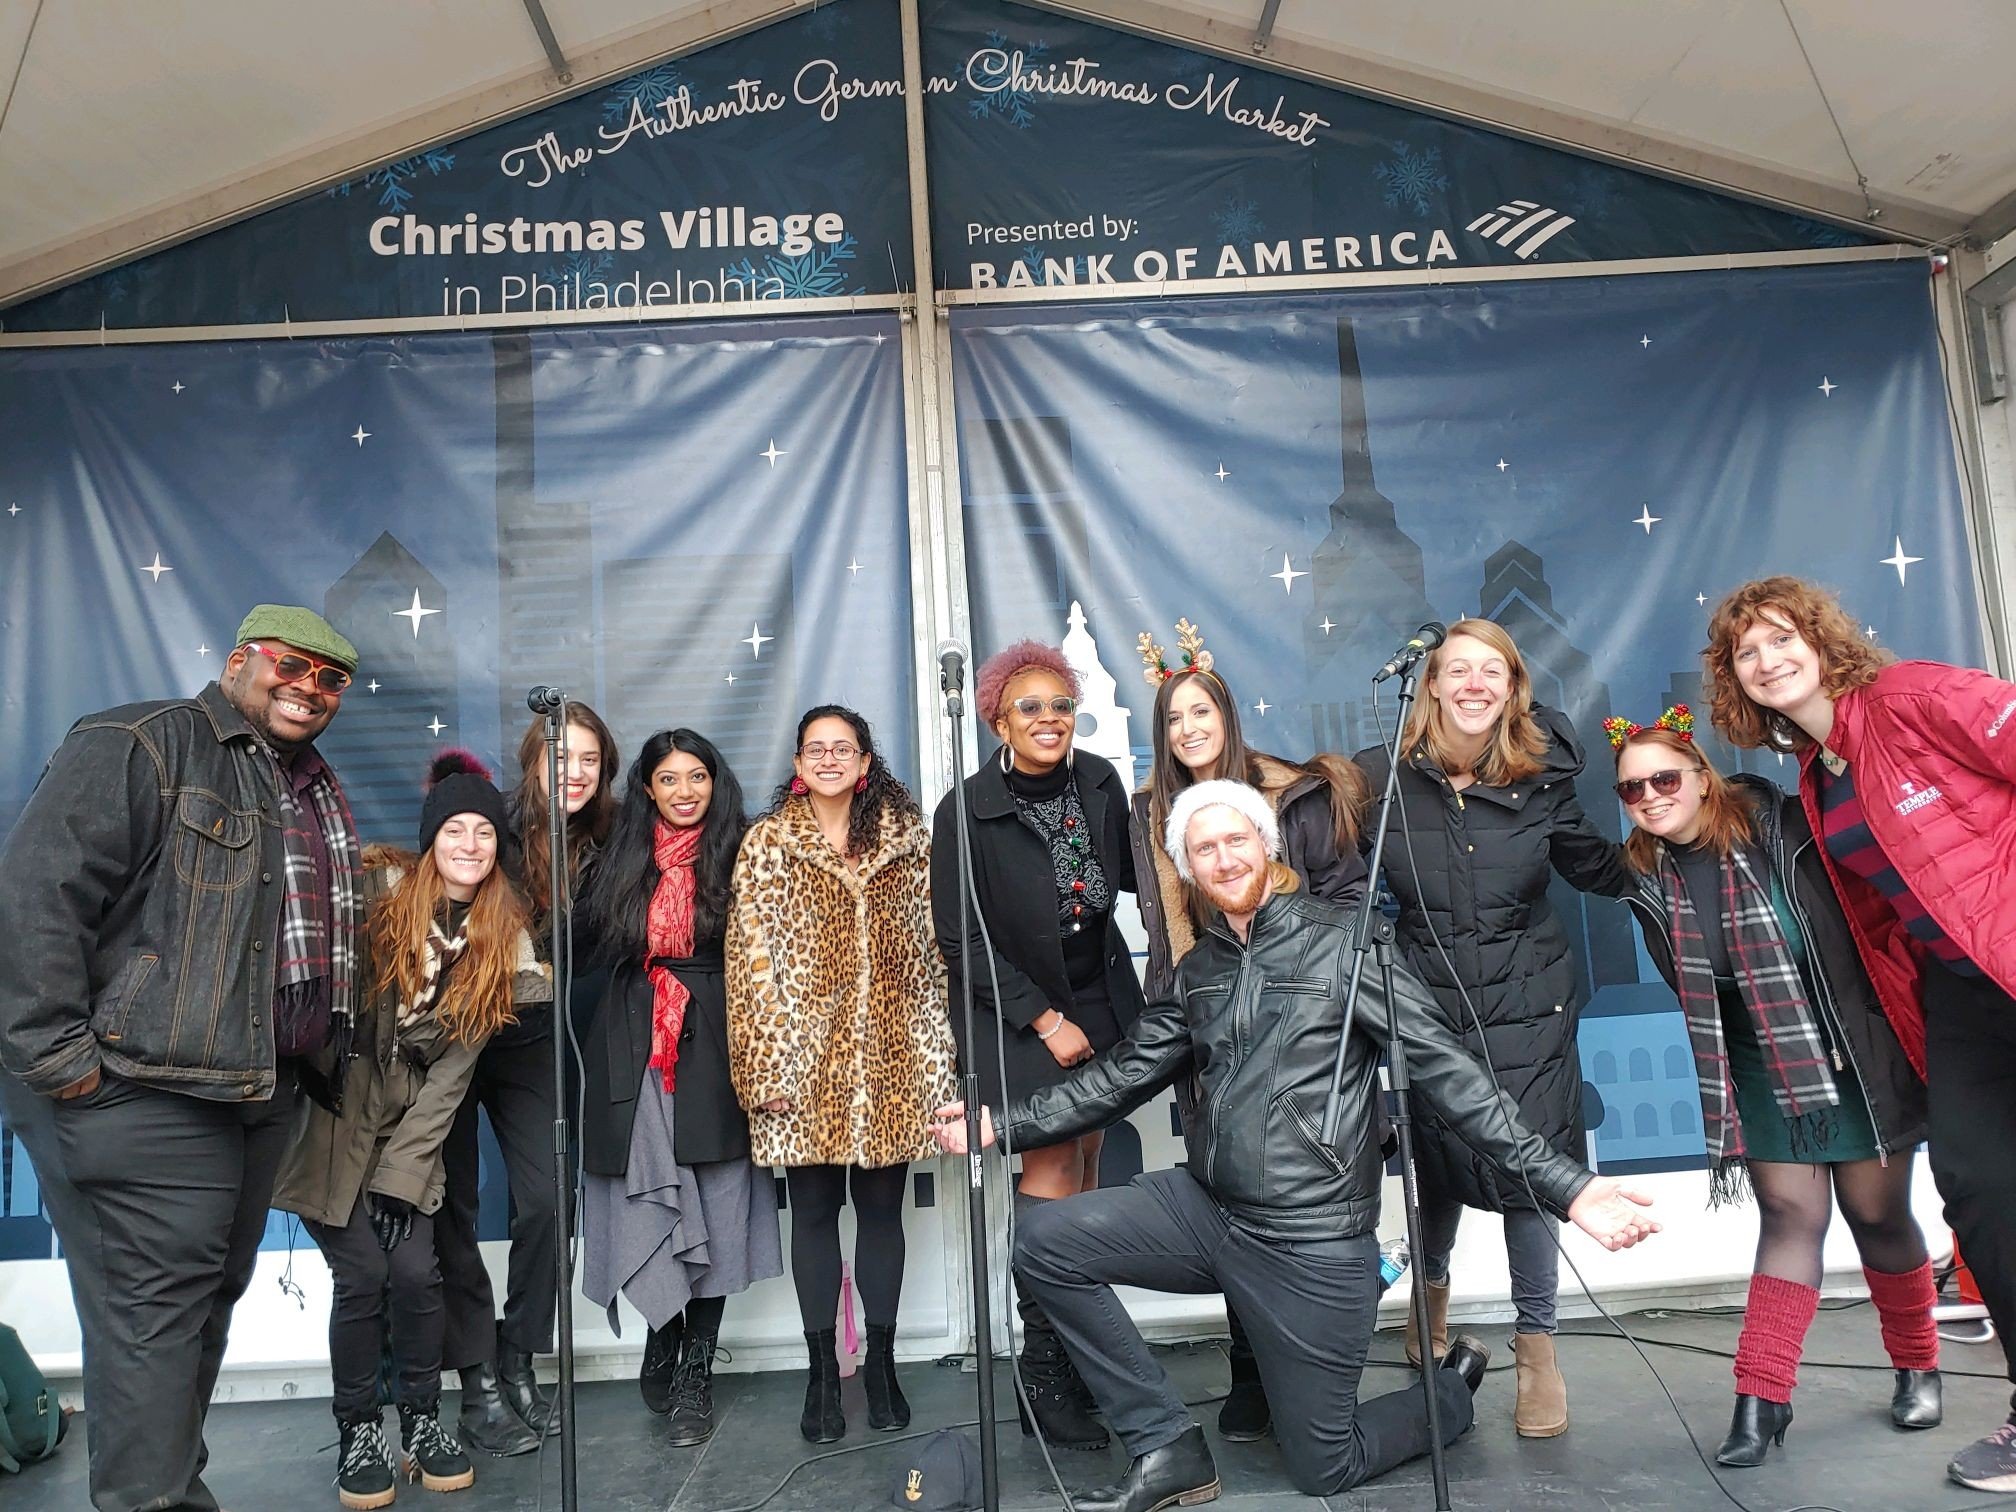    Noteworthy onstage at Philadelphia’s Christmas Village in 2022   